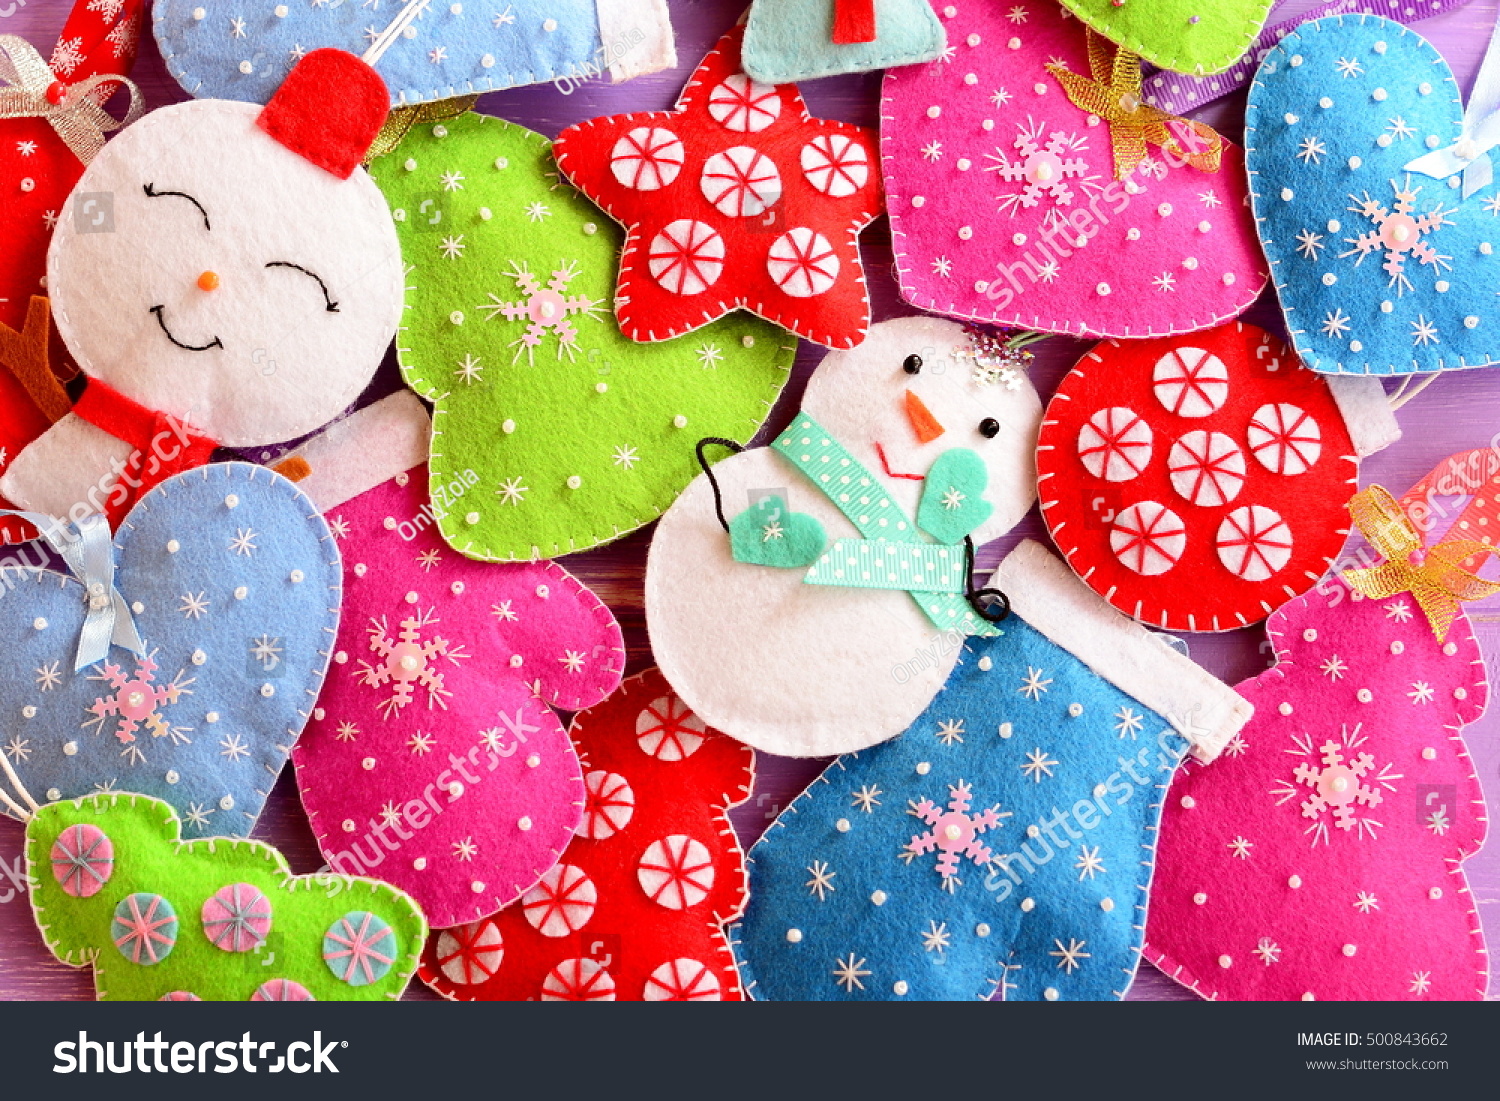 Kids Christmas background. Cute felt ornaments for Christmas. Felt Christmas trees, snowmen, hearts, stars, mittens toys. Mixed hanging Christmas decorations diy red green white blue pink. Top view  #500843662